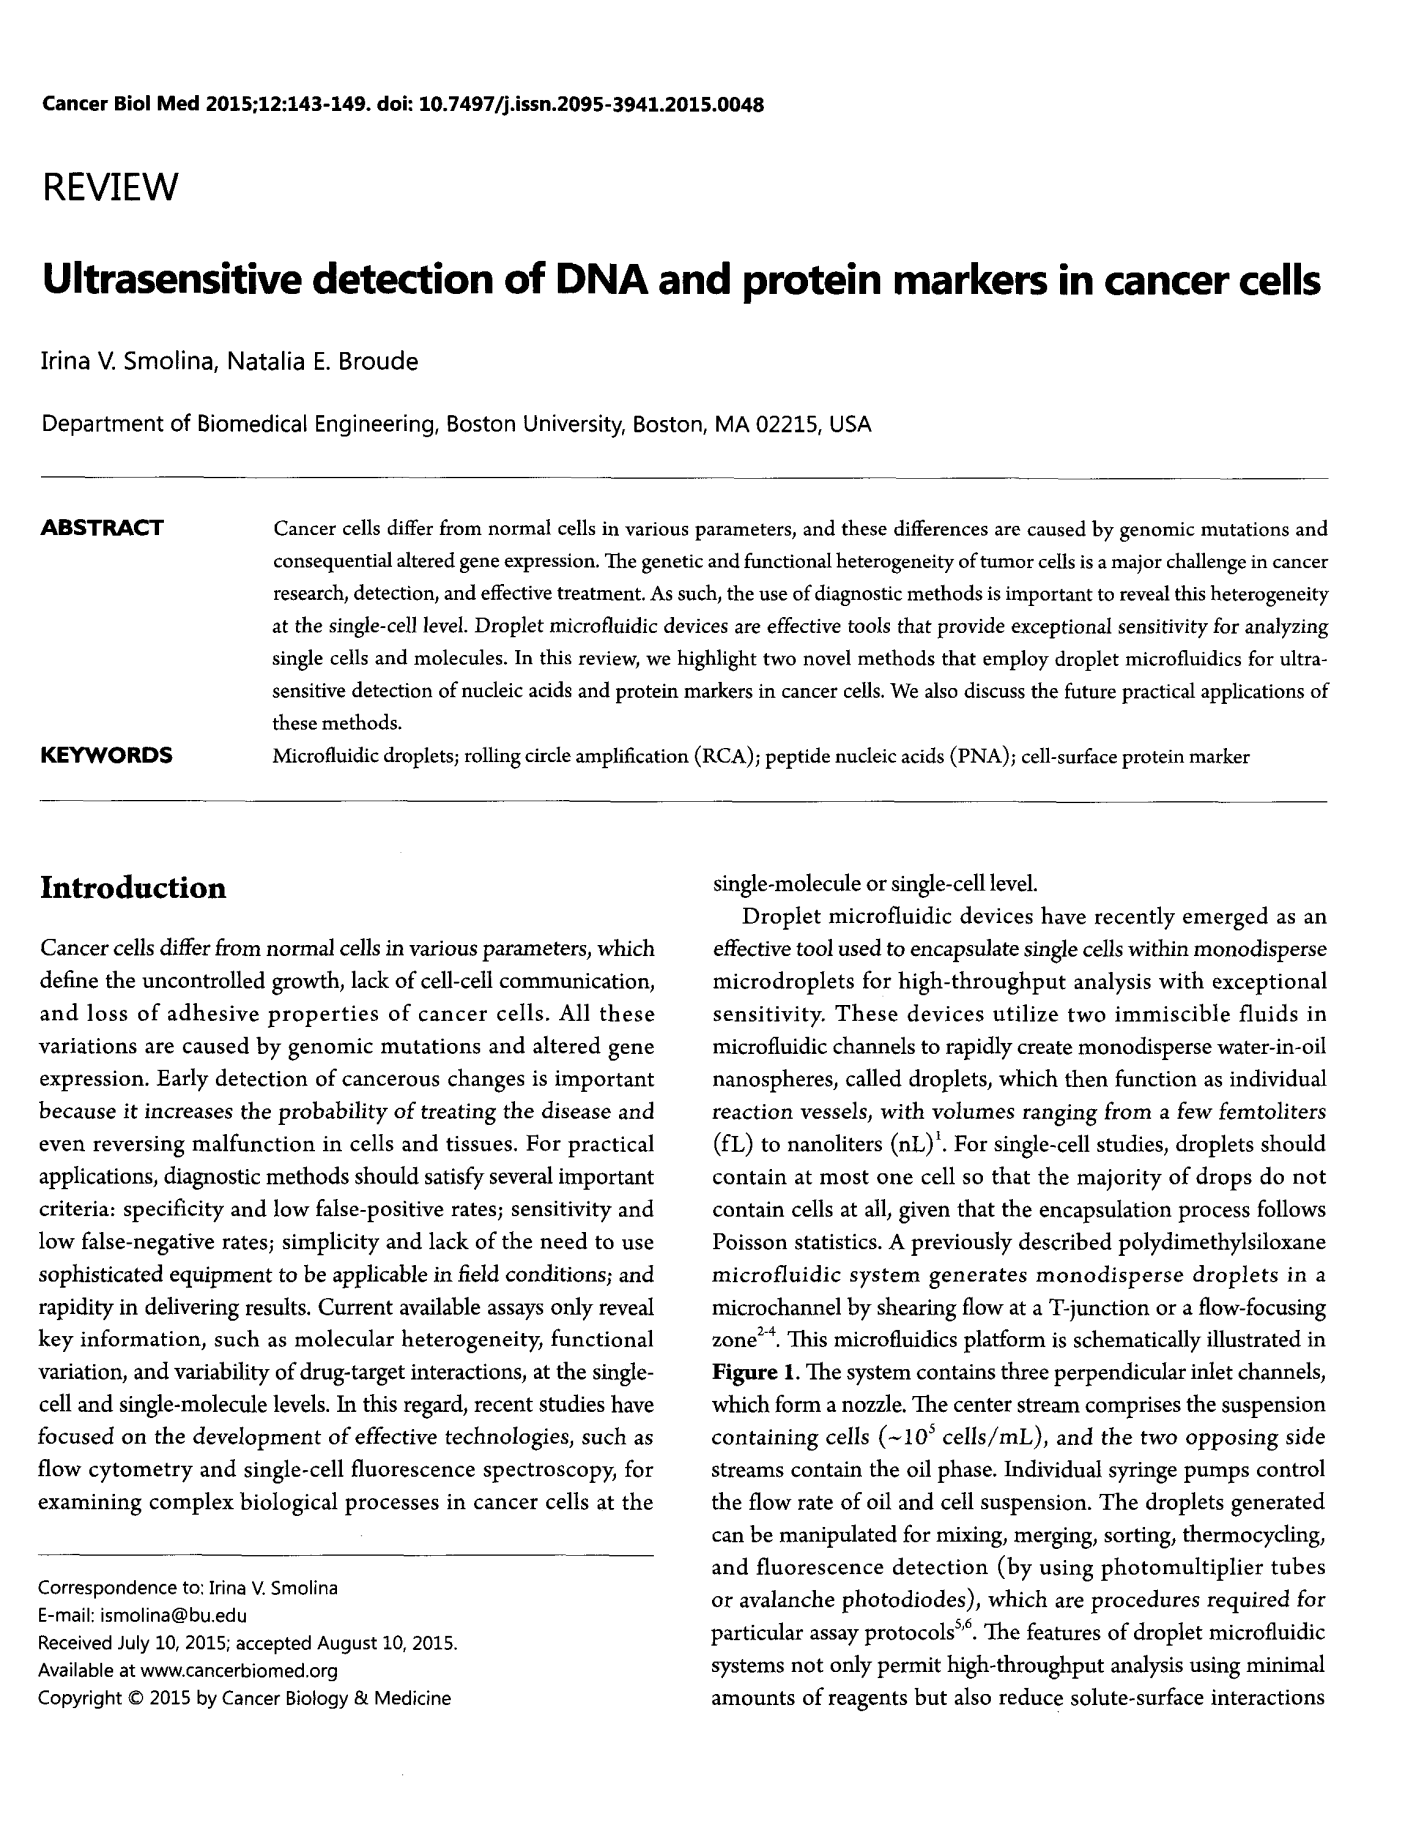 Ultrasensitive detection of DNA and protein markers in cancer cells